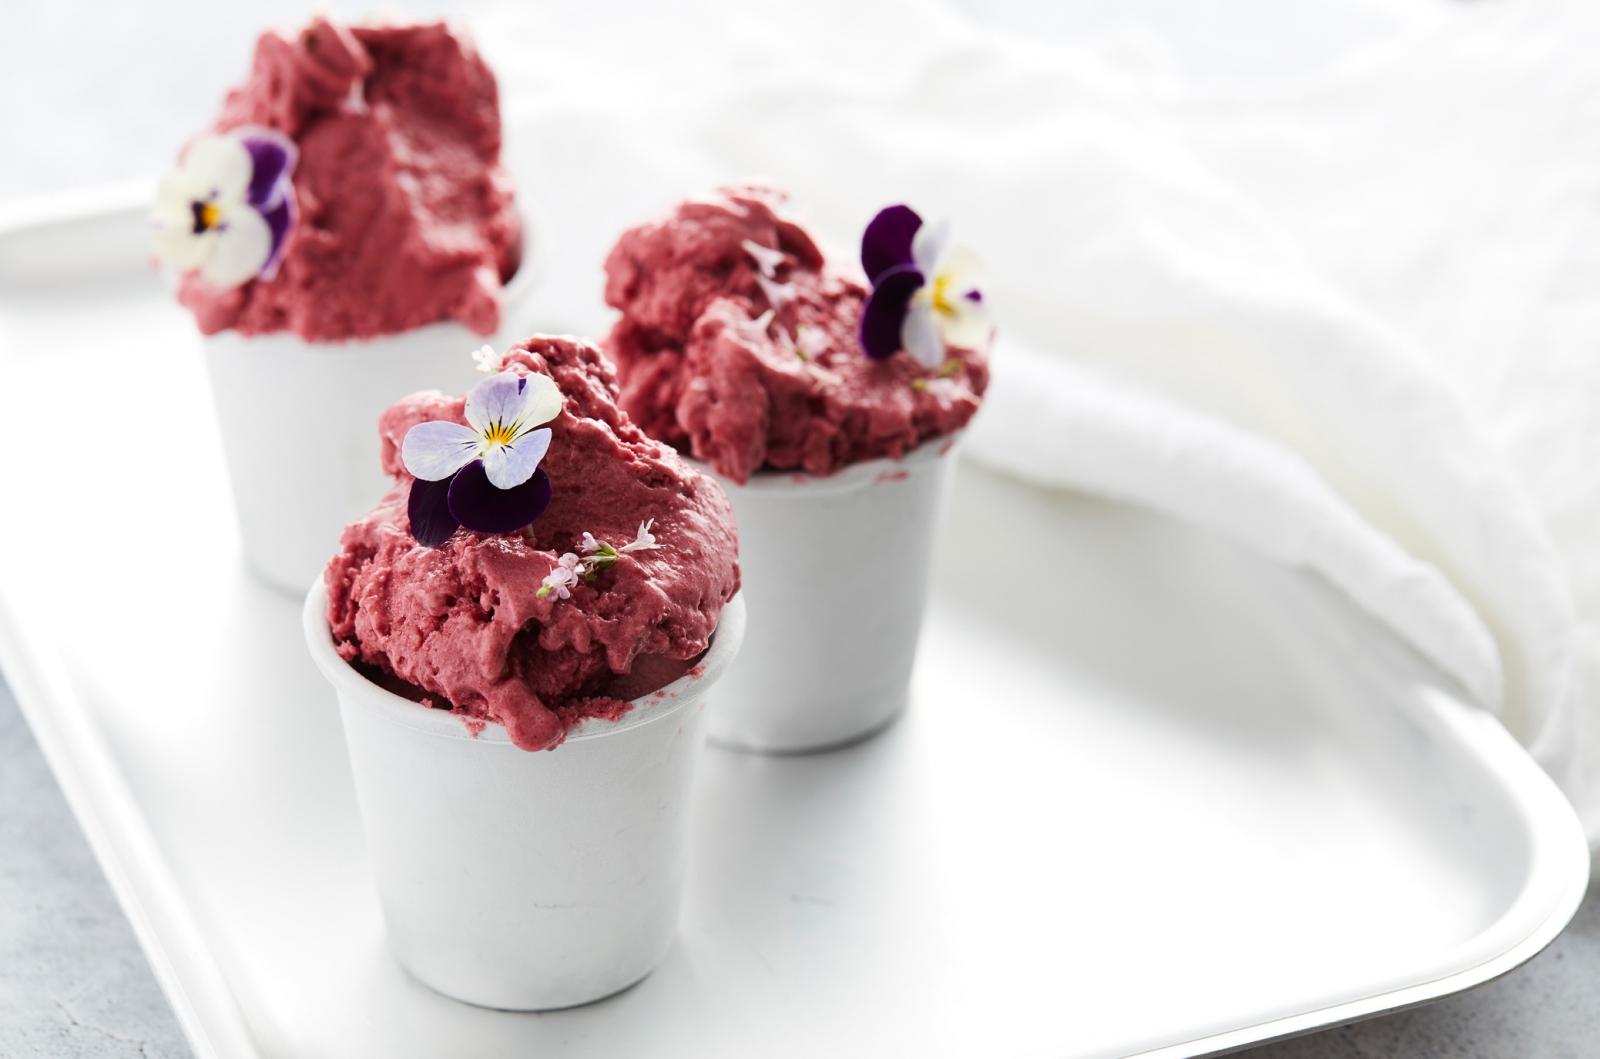 Berry Soft Serve Ice Cream from our Start to Keto eBook